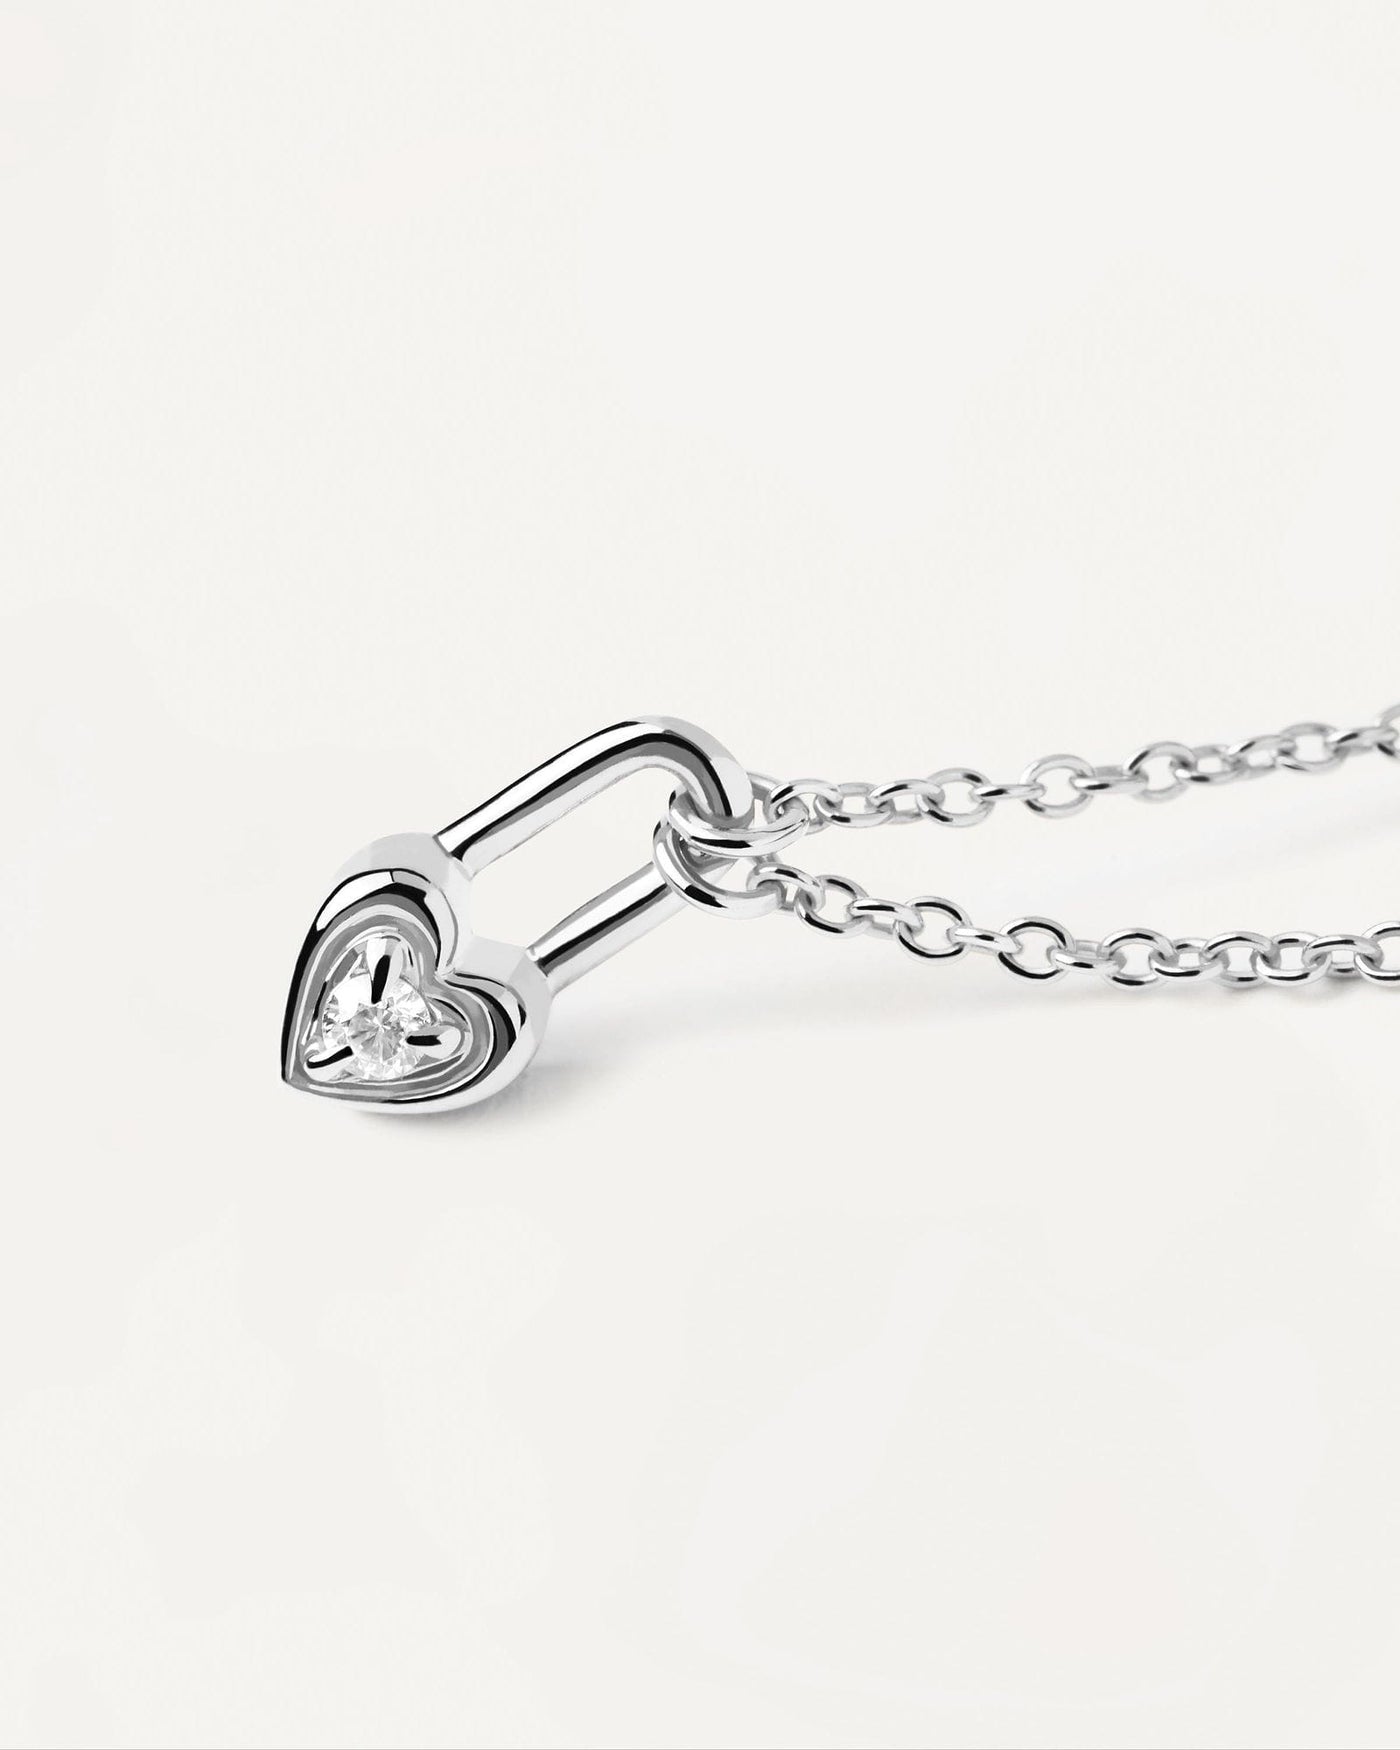 2024 Selection | Heart Padlock Silver Necklace. Silver necklace with heart padlock pendant set with white zirconia. Get the latest arrival from PDPAOLA. Place your order safely and get this Best Seller. Free Shipping.